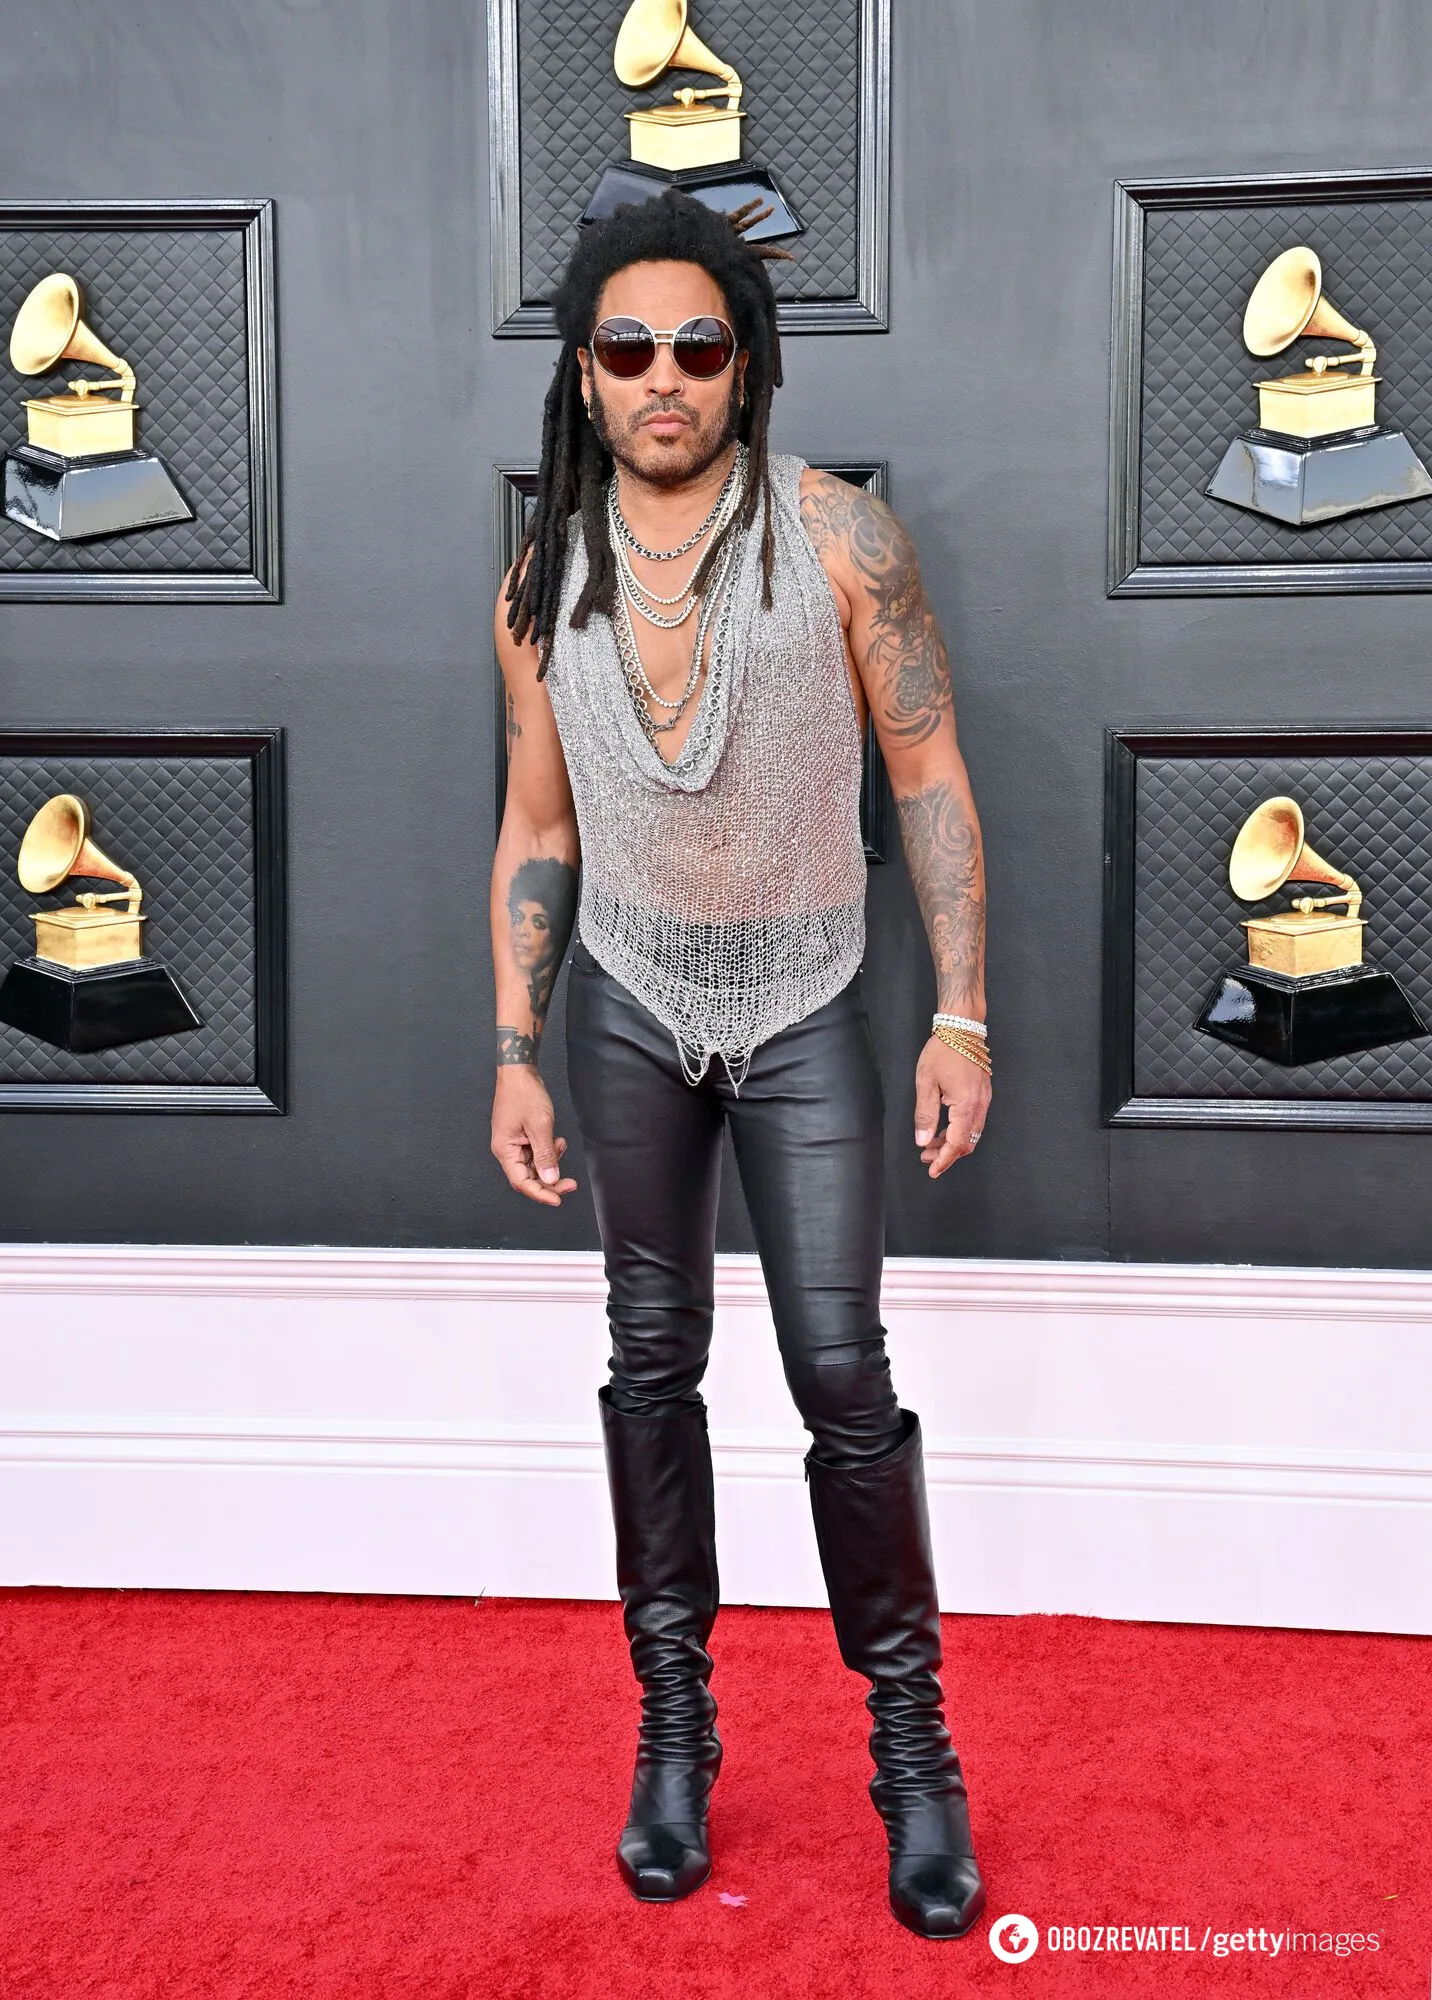 He works out in leather pants. 59-year-old Lenny Kravitz amazed the network by showing a video from the gym